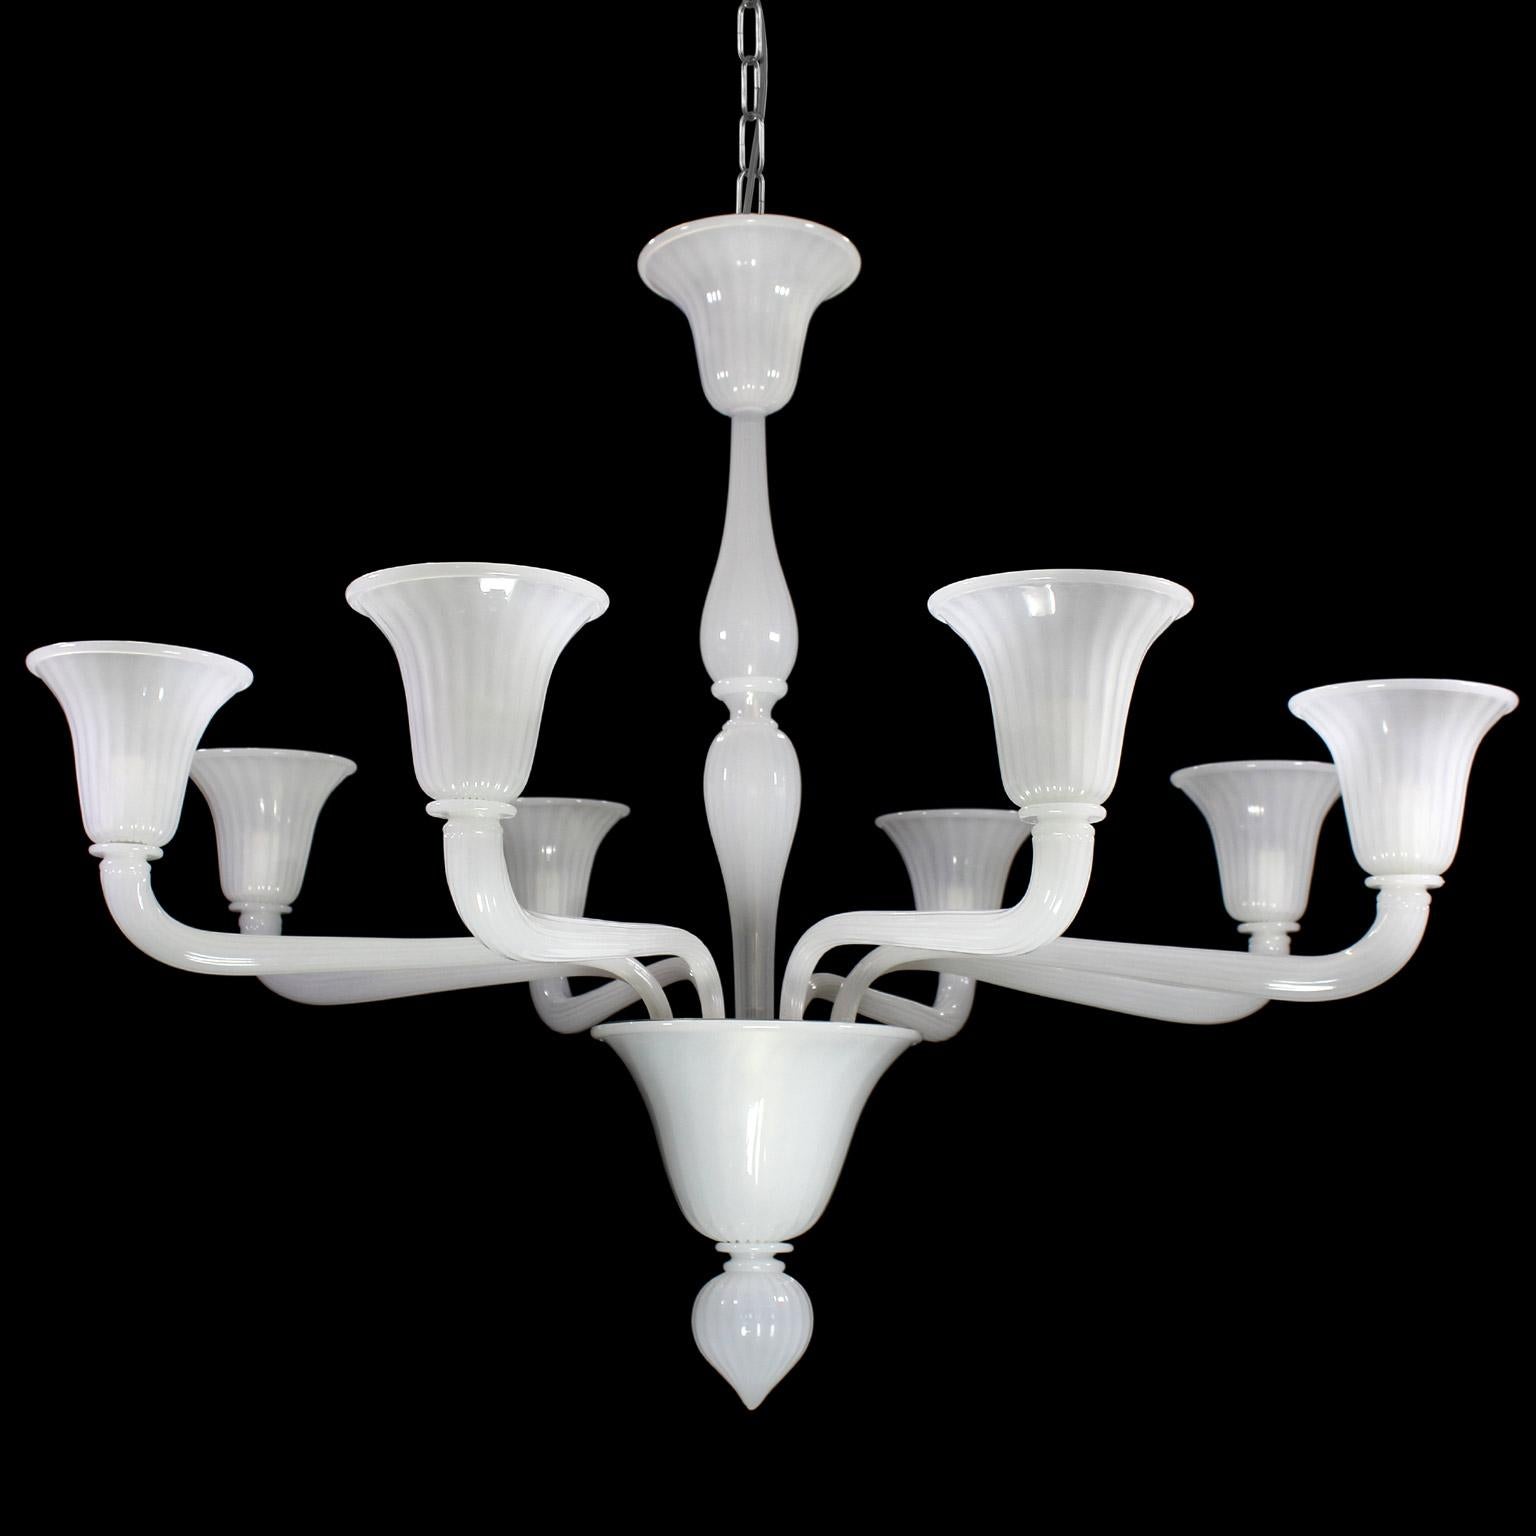 Bevante collection is the Venetian name with which is called the glass, and this is also the name of this slender chandelier, that has been designed using basic, elegant and harmonious shapes.
The design harks back to the Murano glass chandeliers